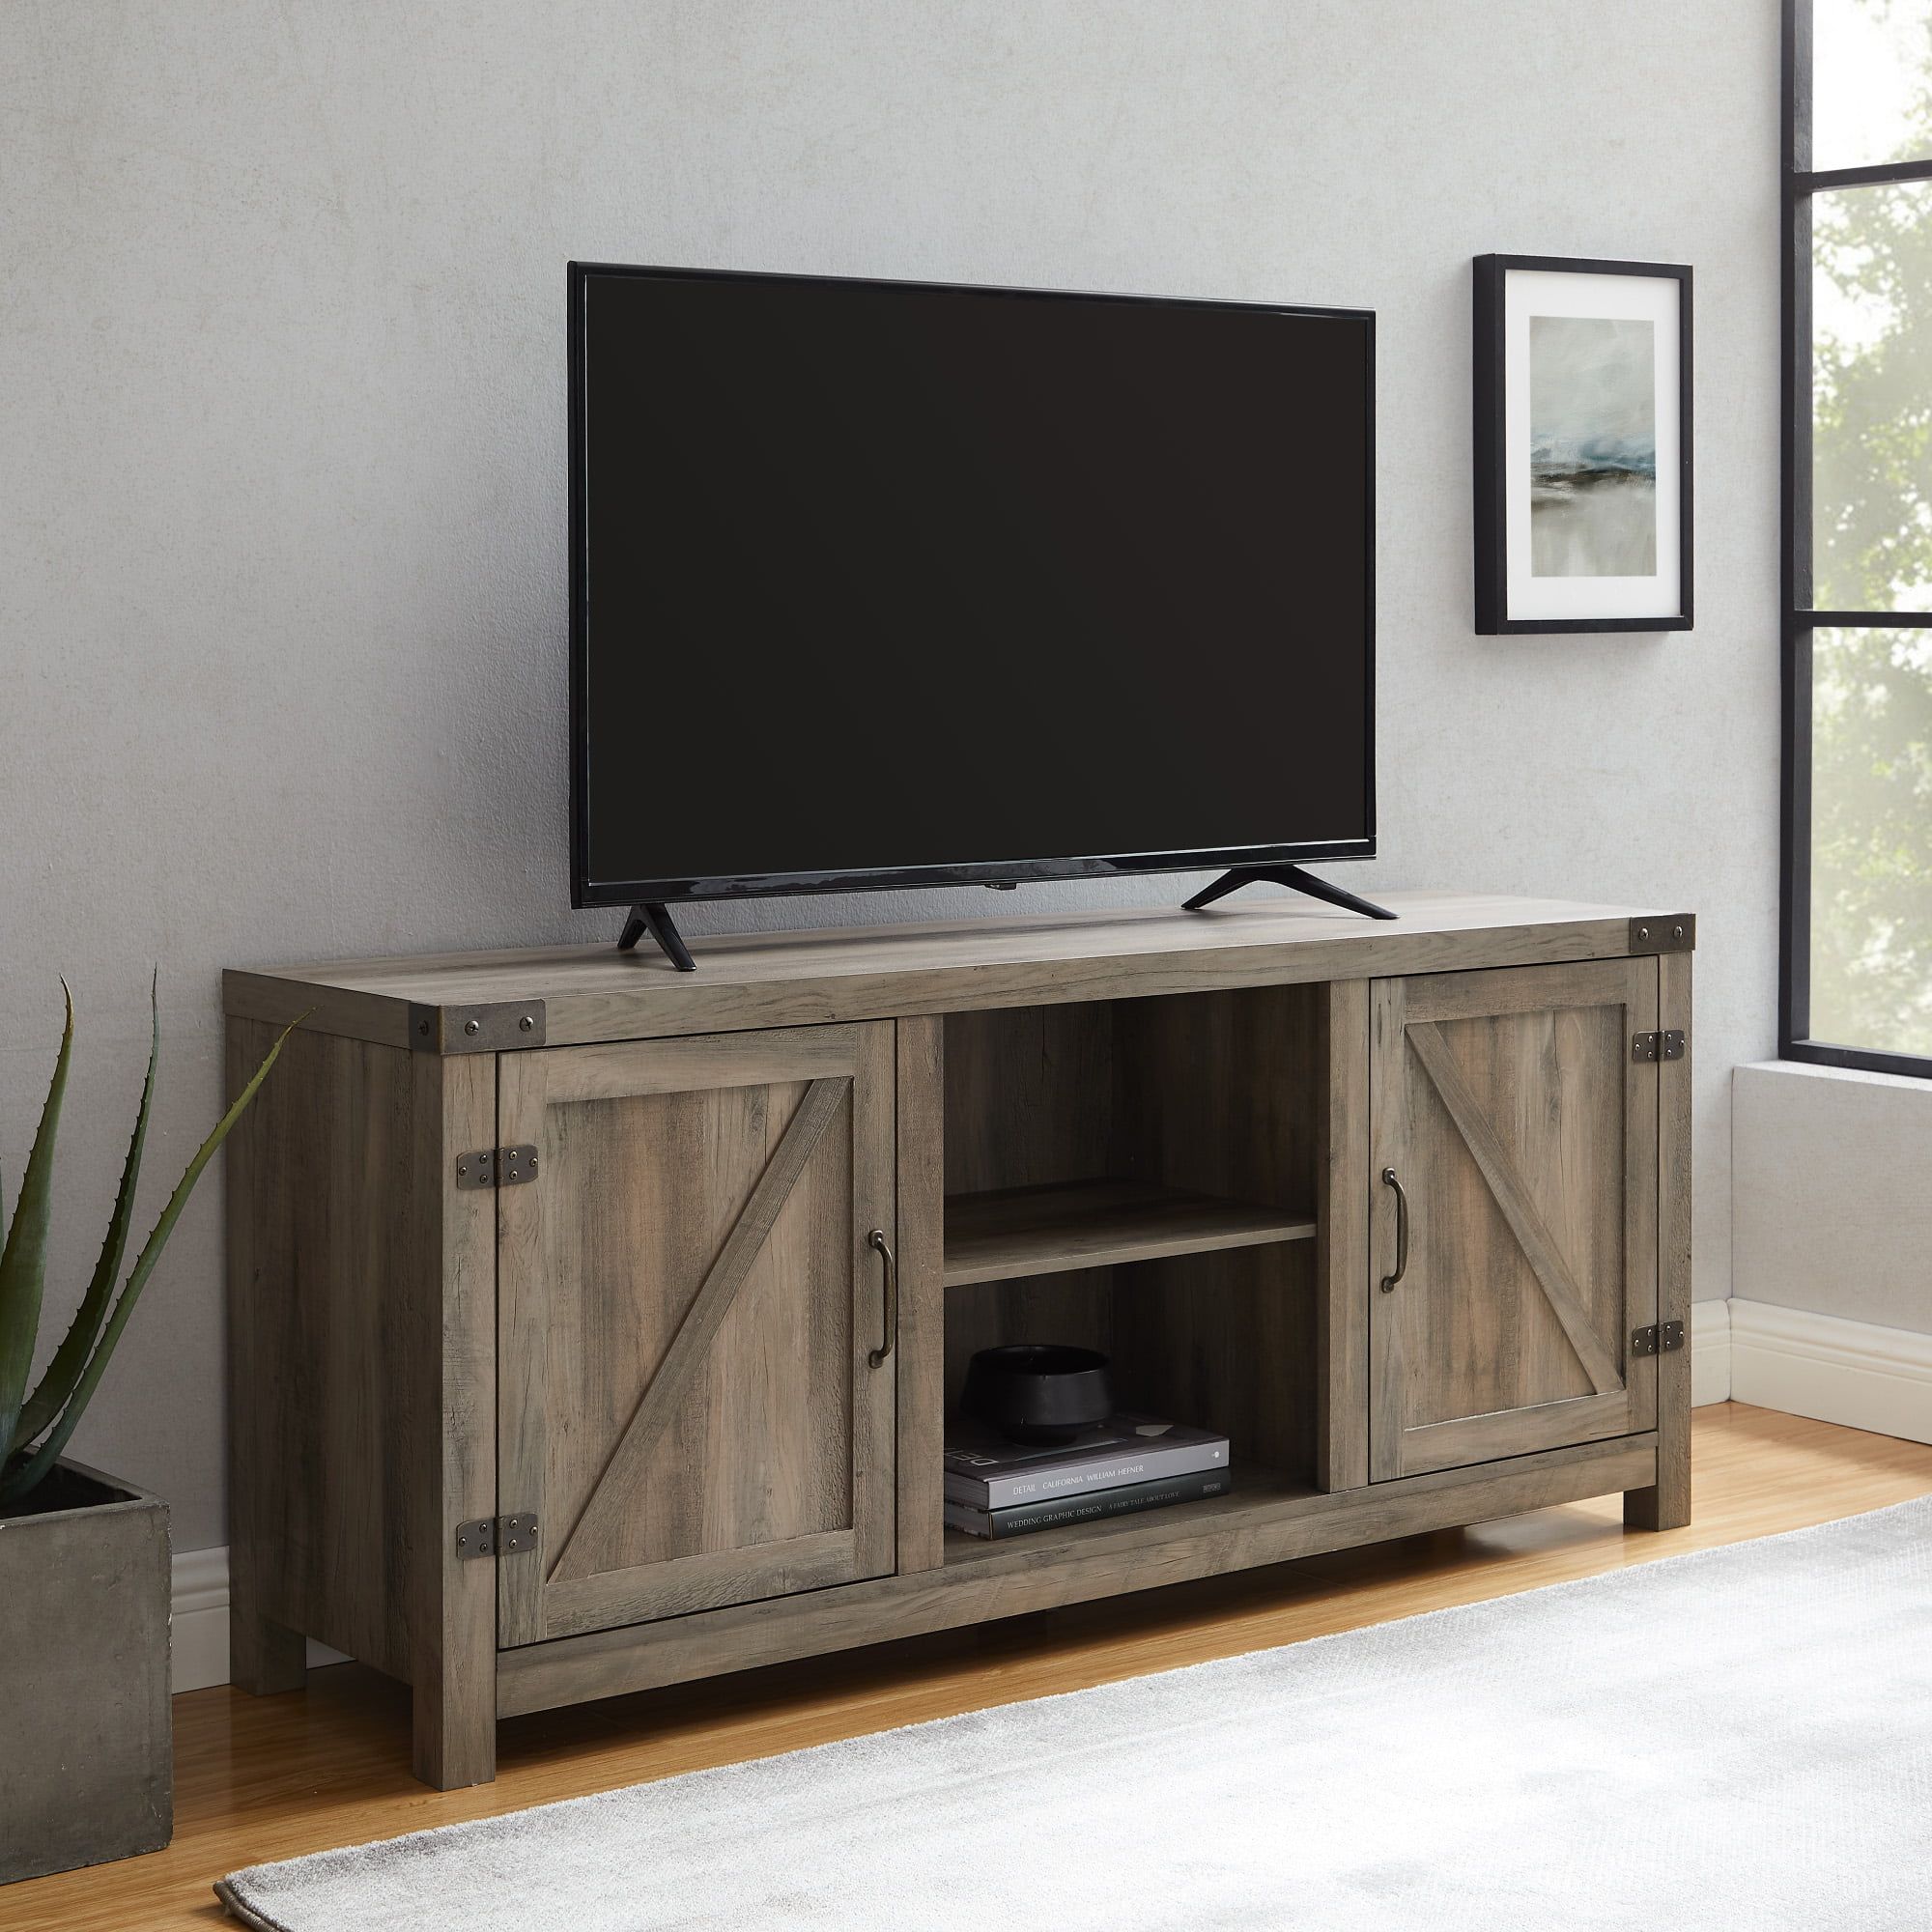 Tv Stands 65 Inch : Woven Paths Modern Farmhouse Barn Door Tv Stand For Inside Modern Farmhouse Barn Tv Stands (Gallery 9 of 20)